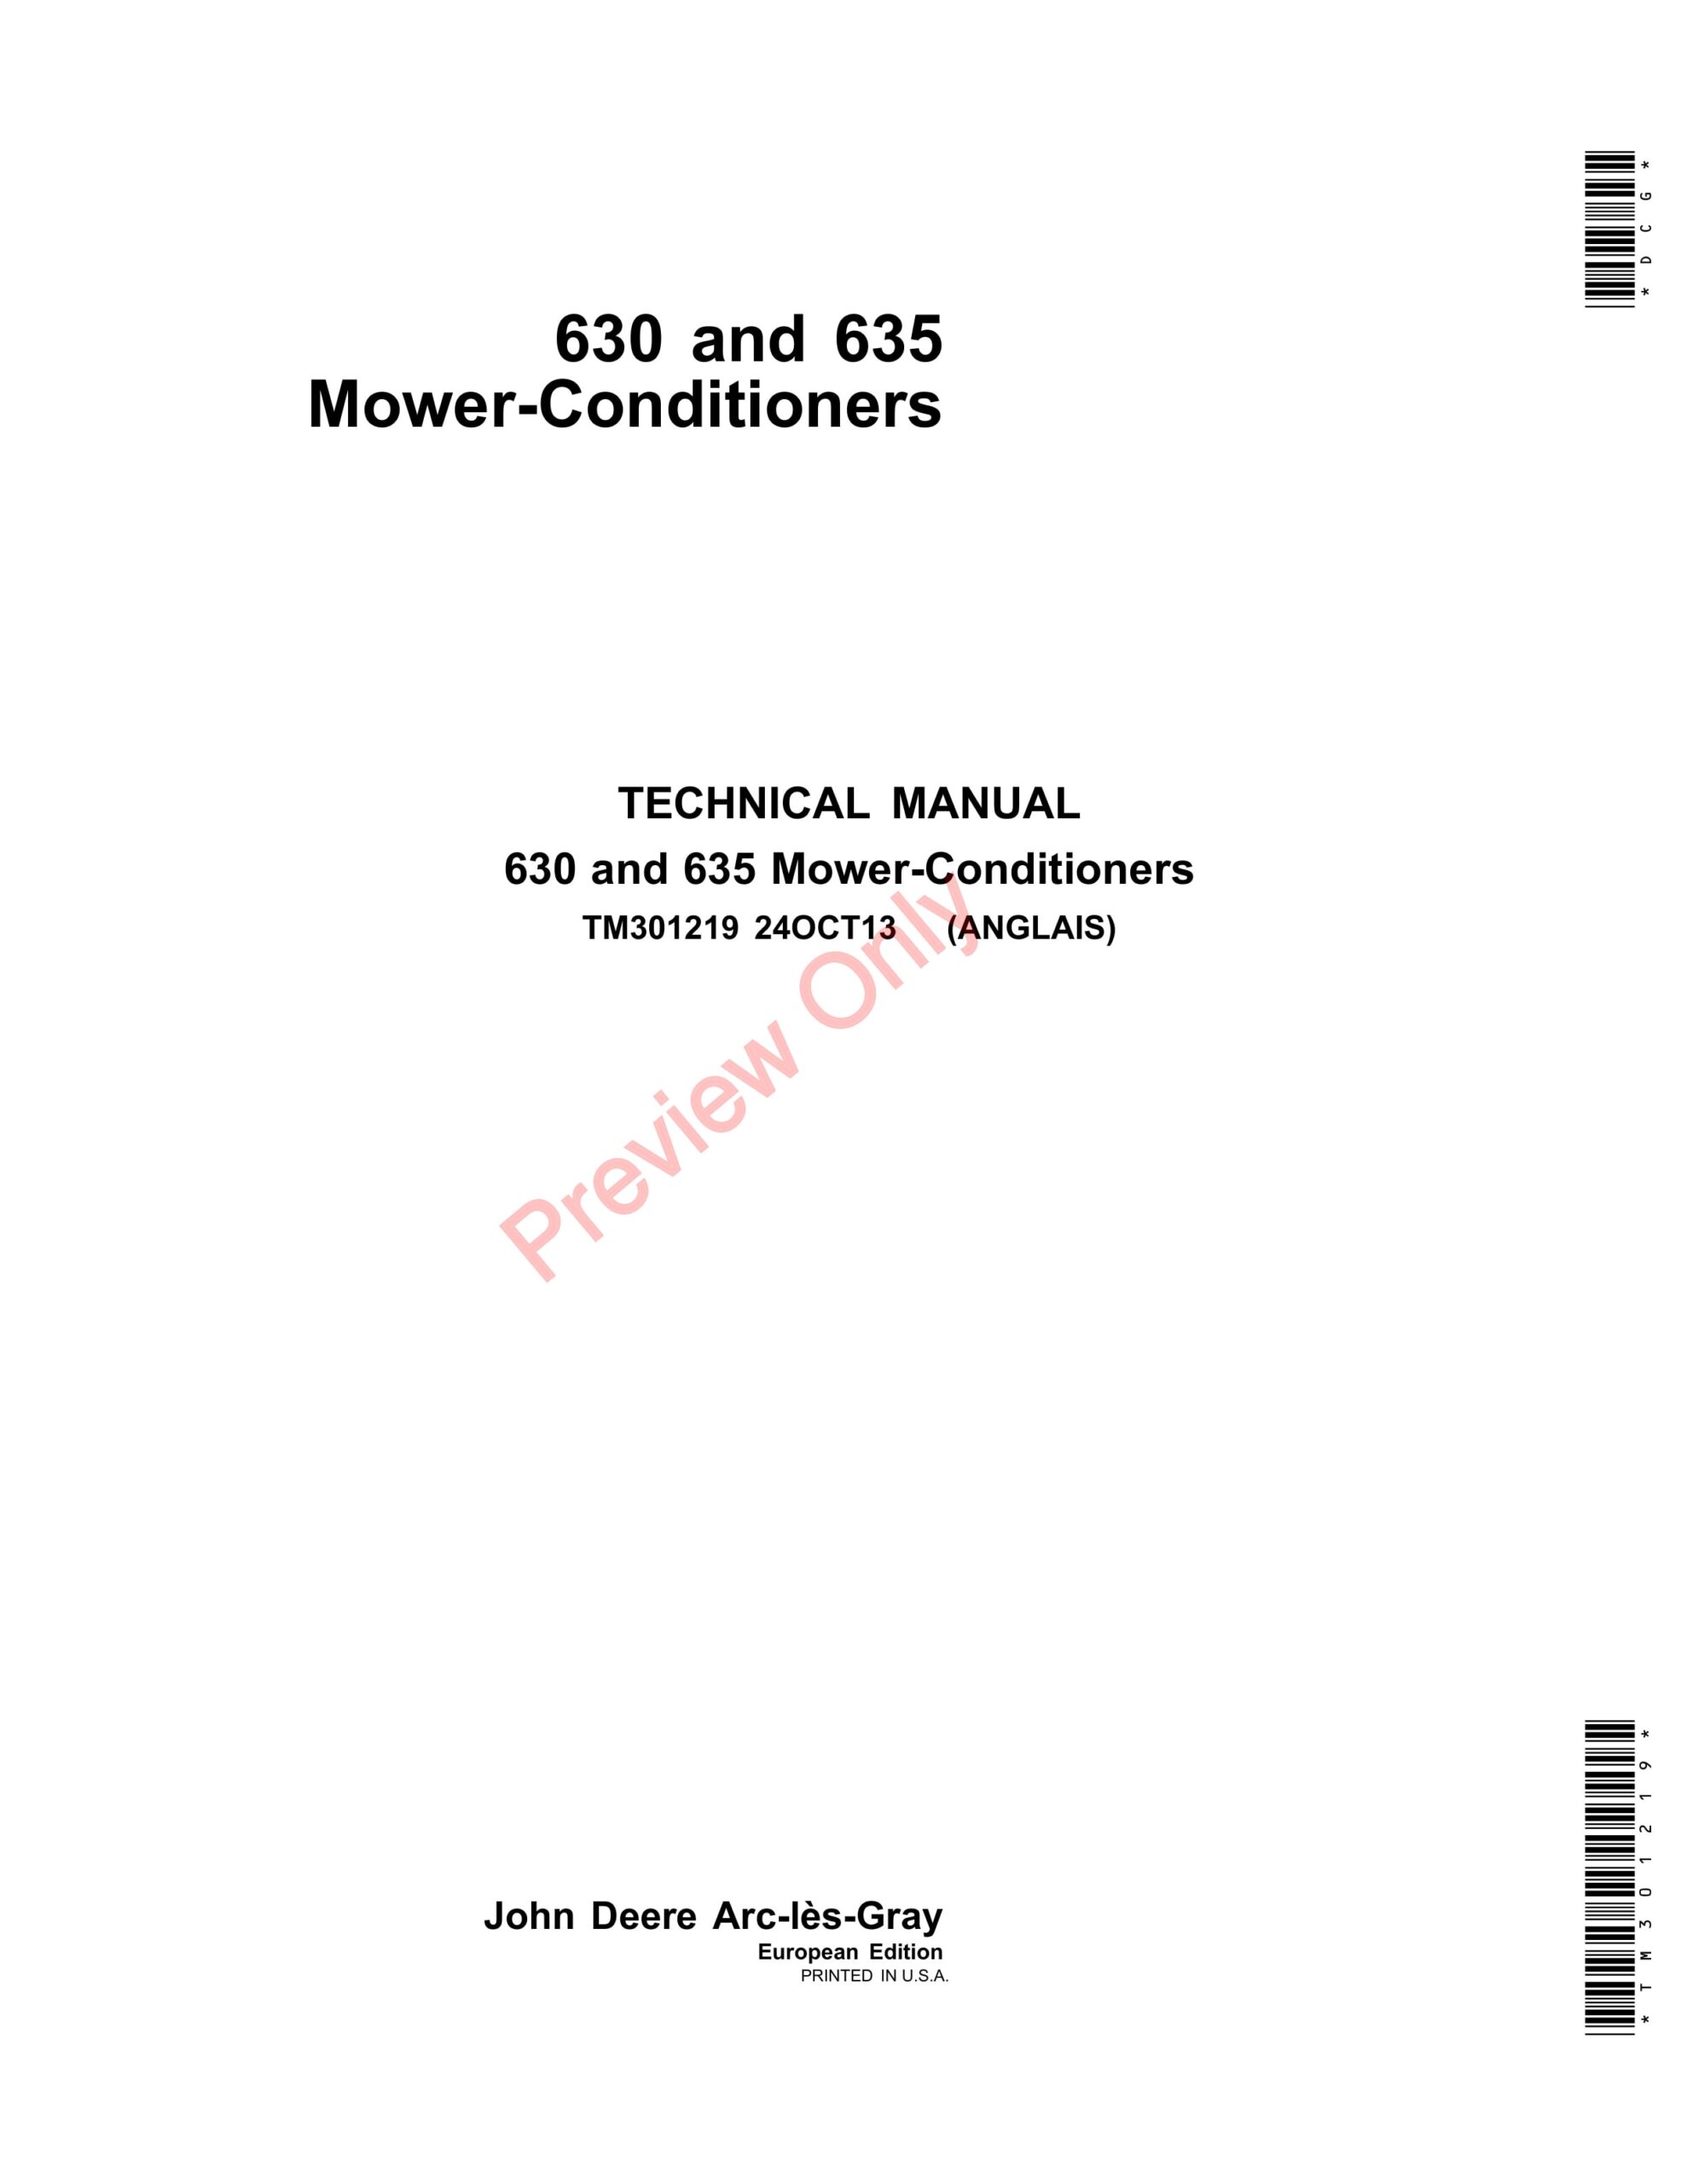 John Deere 630 and 635 Mower-Conditioners Technical Manual TM301219 24OCT13-1